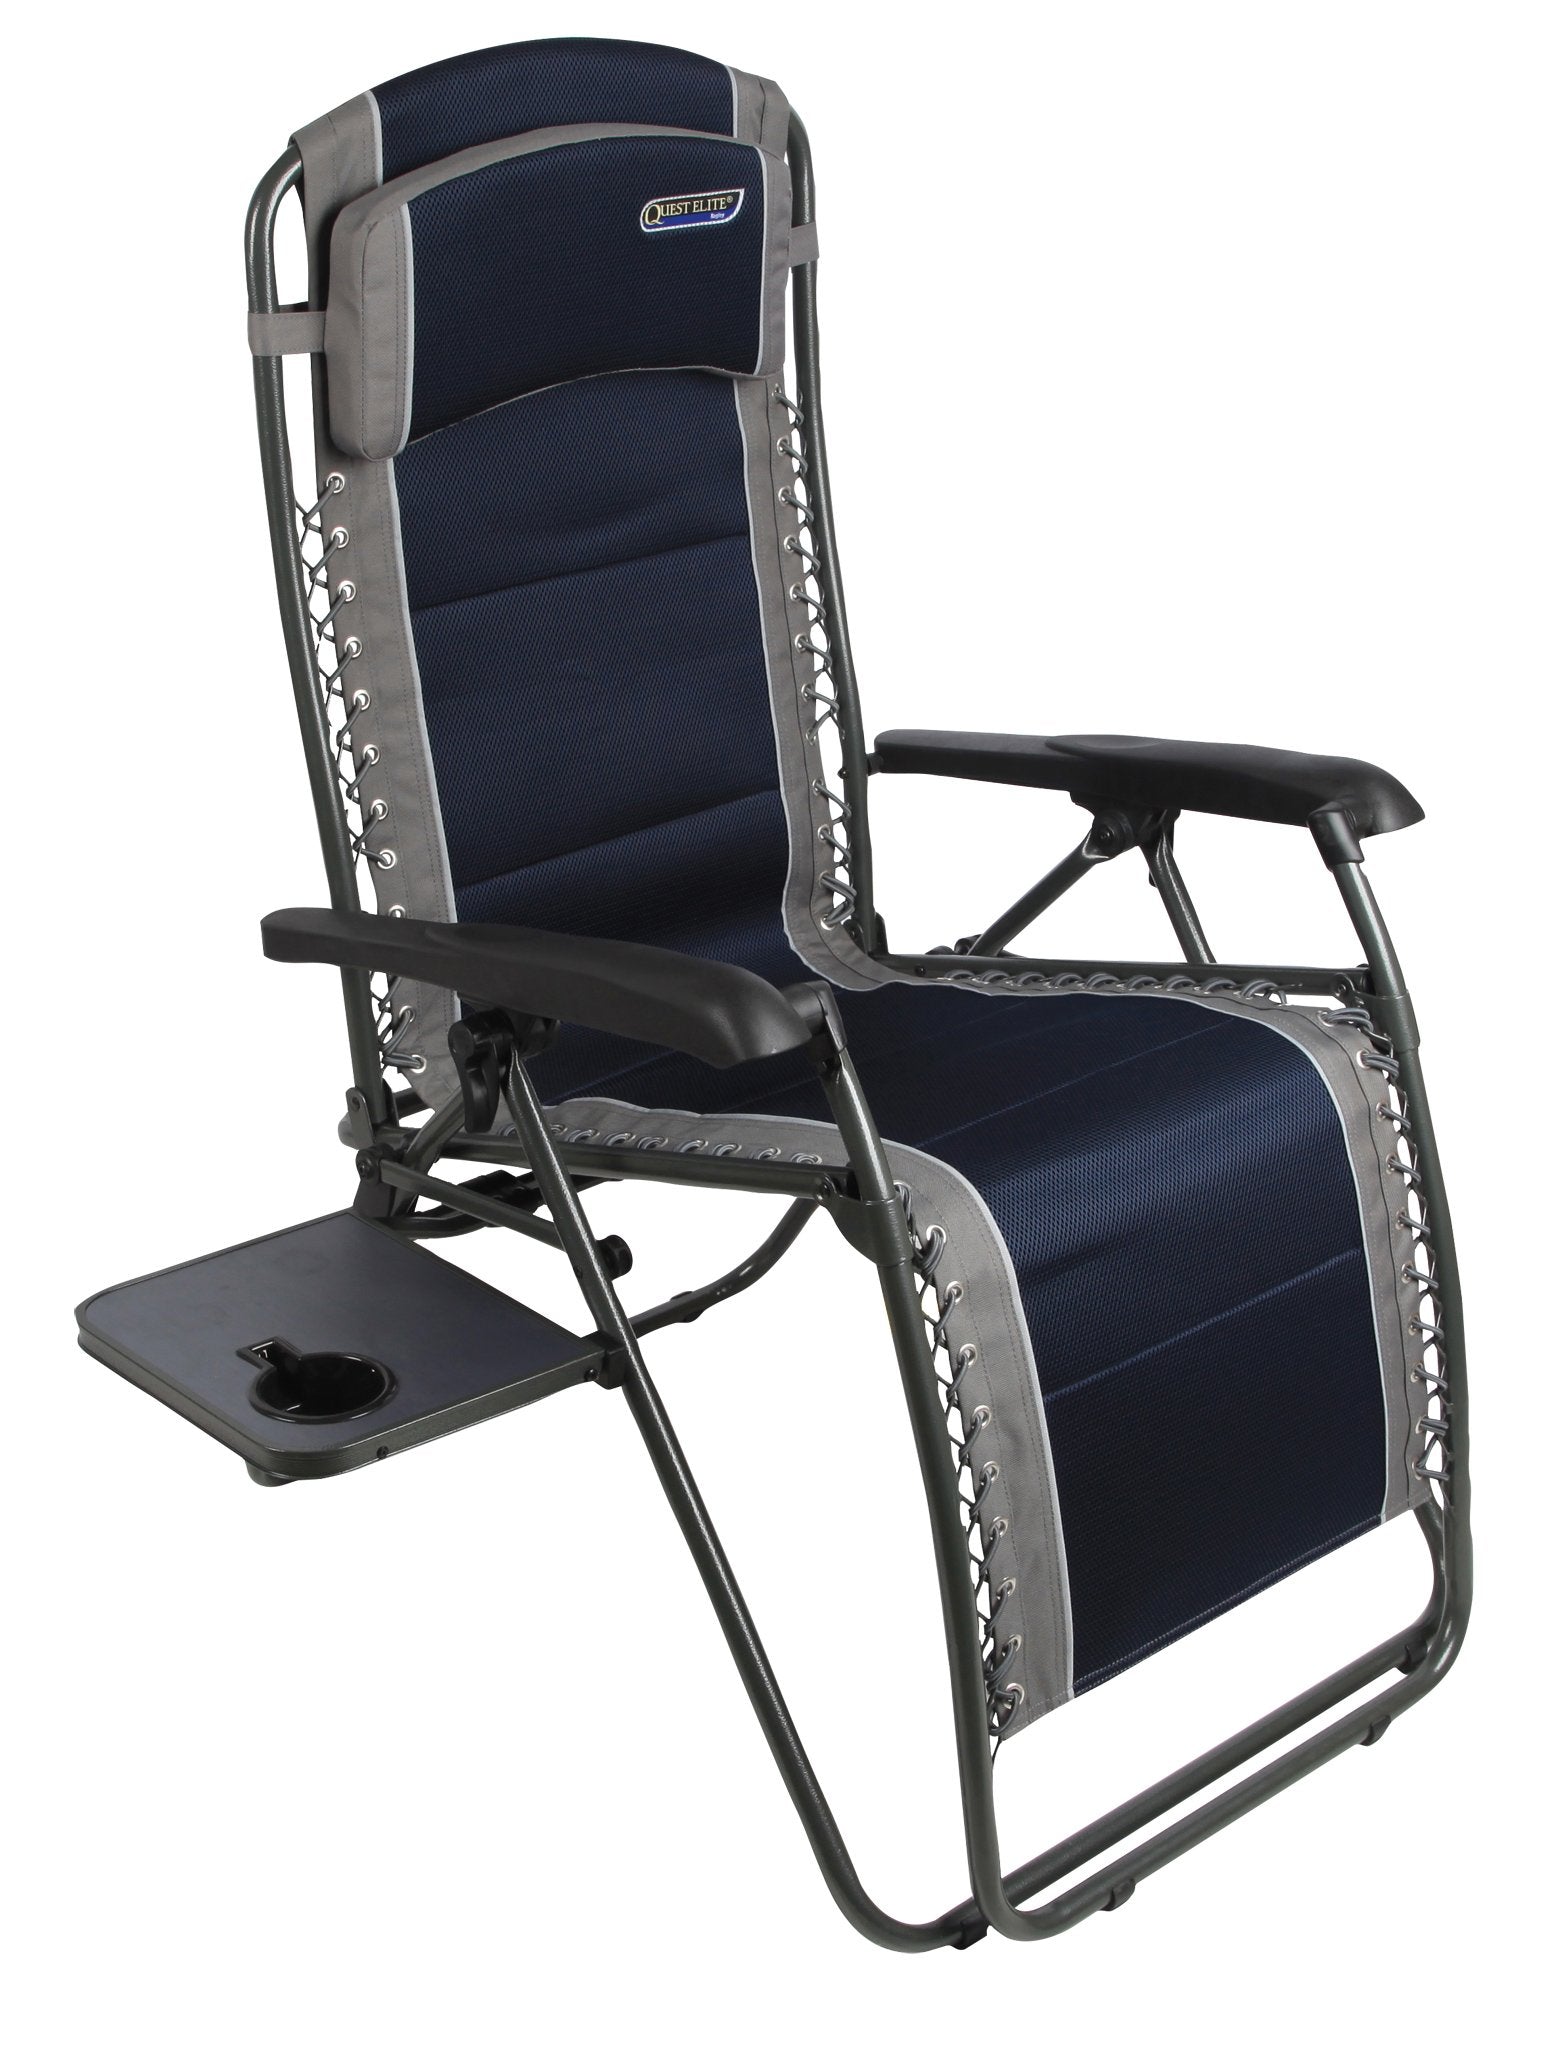 Quest Elite Ragley Pro Relaxer Chair with Side Table Camping Caravan